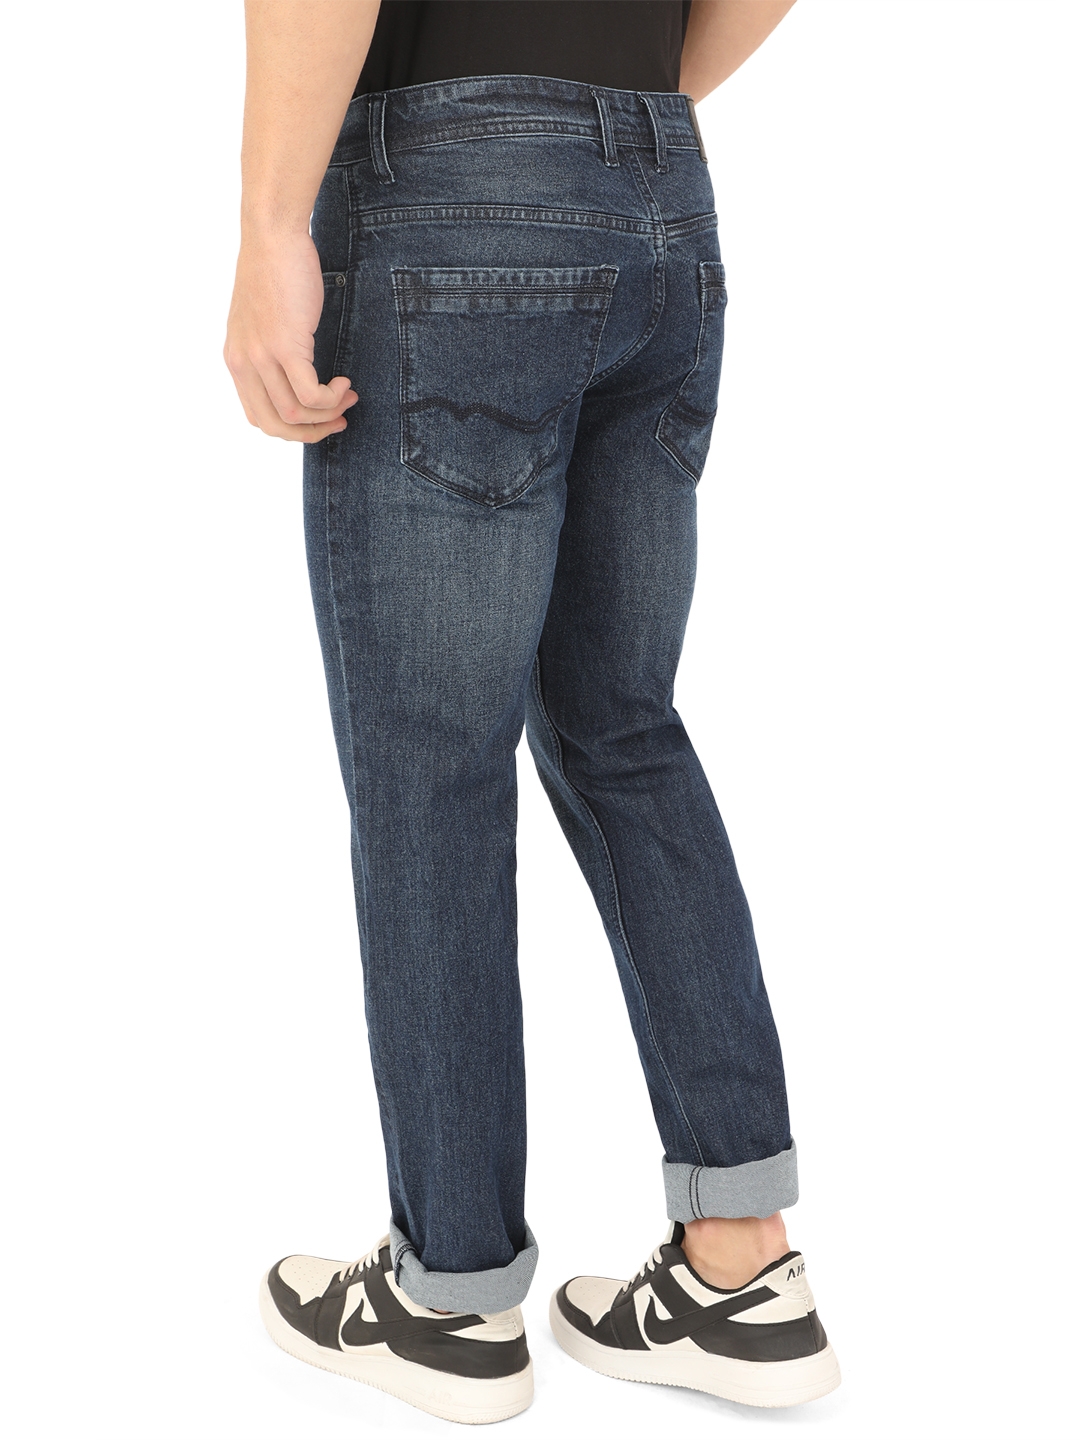 Greenfibre | Denim Blue Washed Narrow Fit Jeans | Greenfibre 2